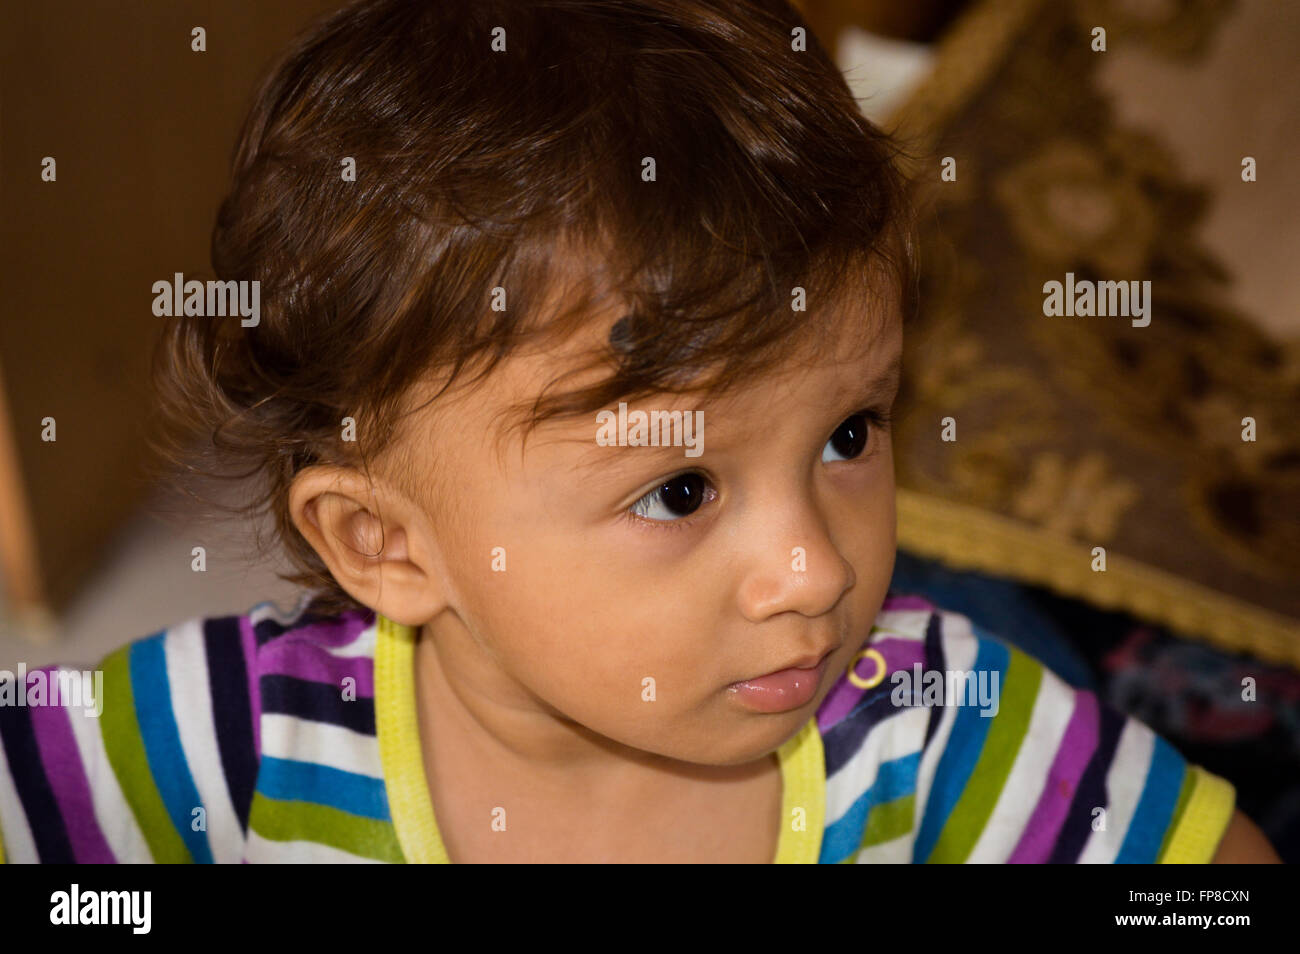 An Indian kid in playful mood Stock Photo